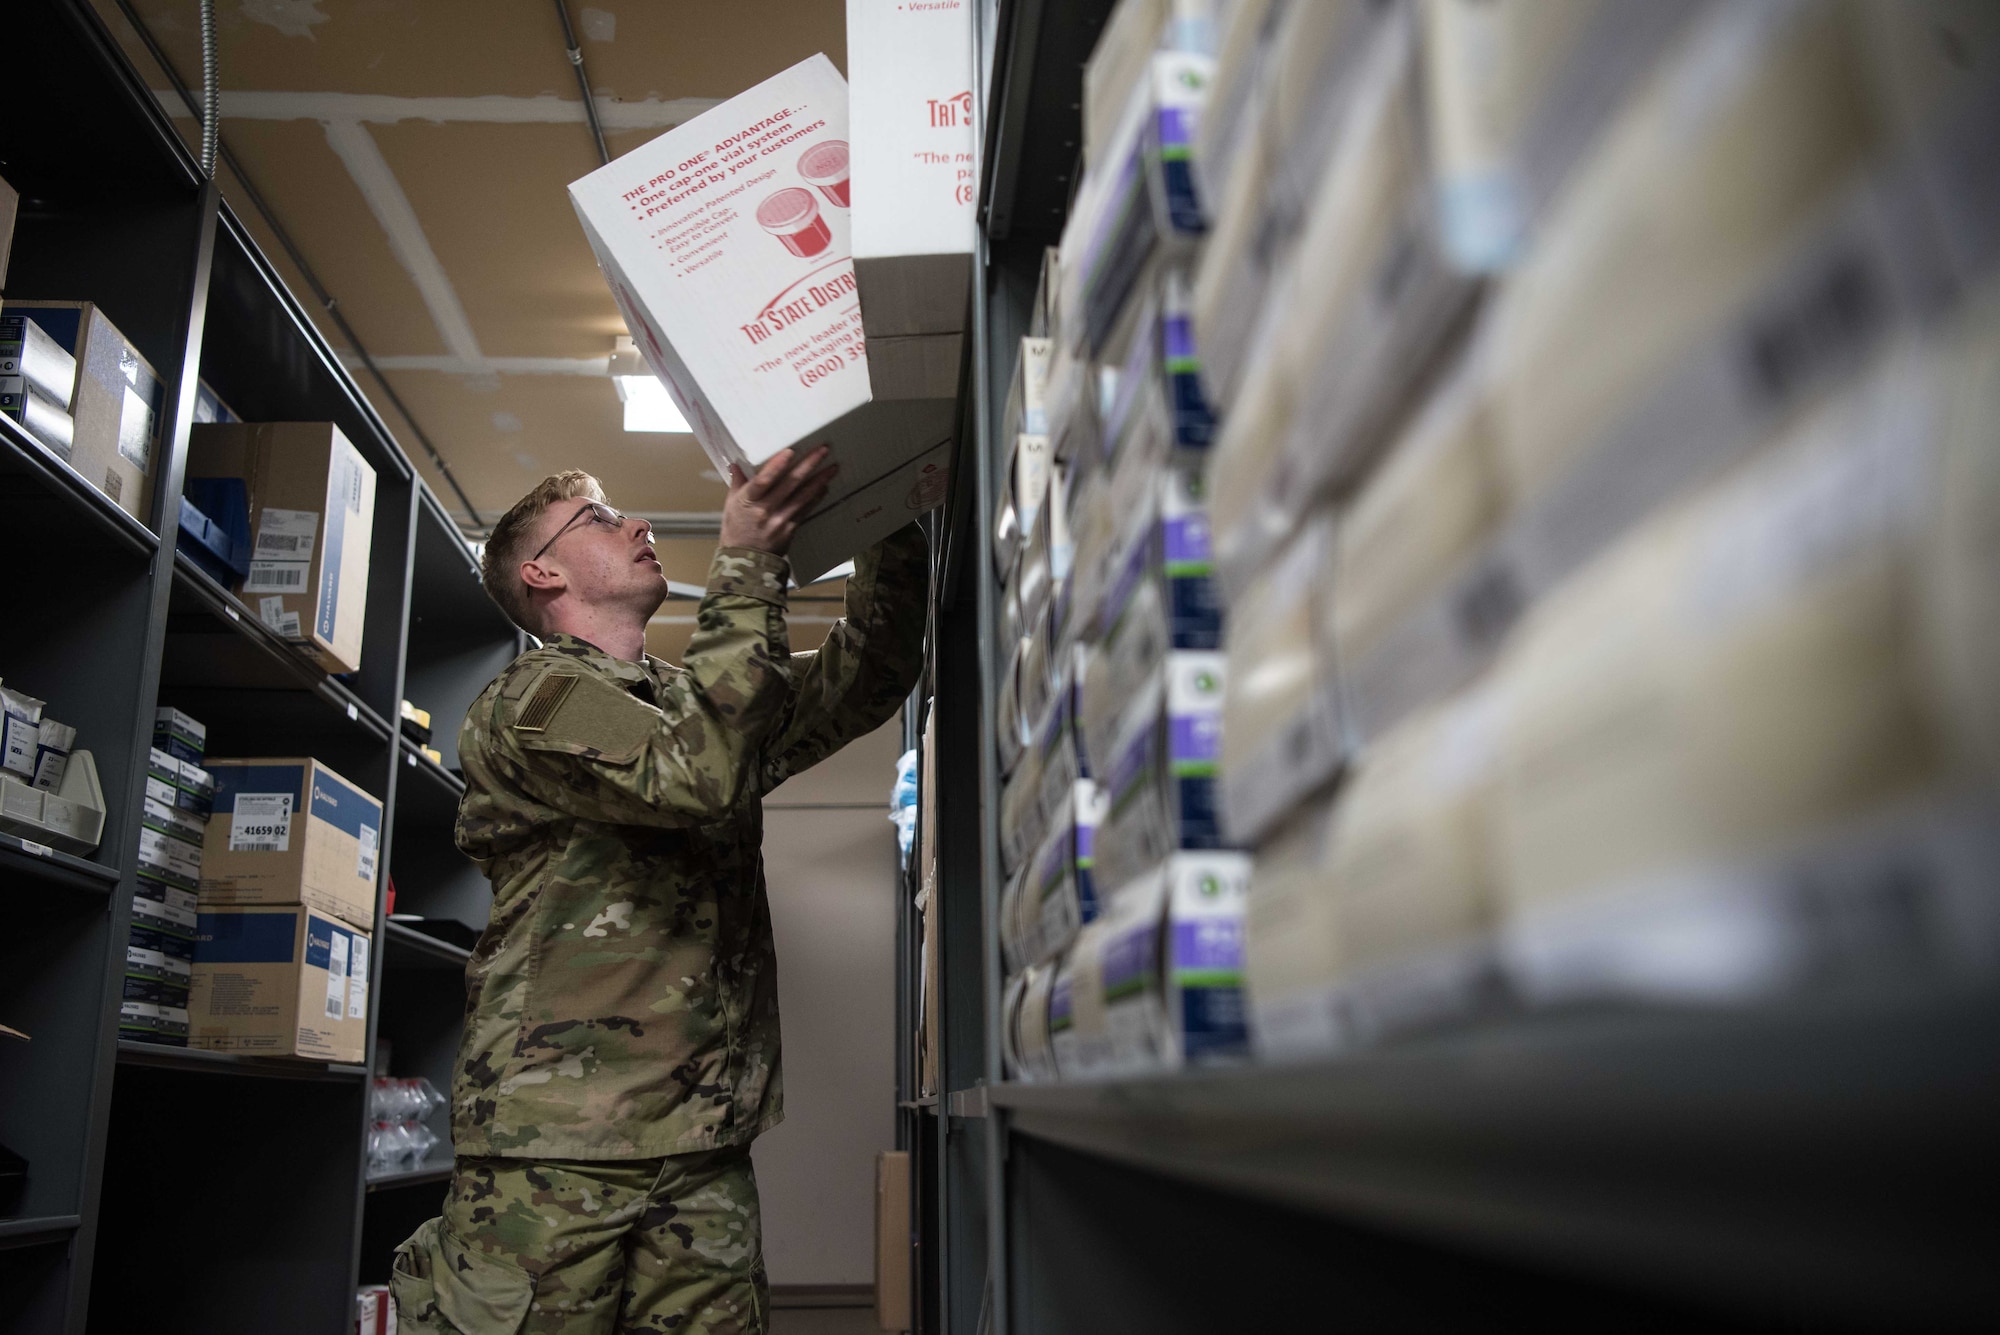 Airman 1st Class Bailey Pitcher, 22nd Medical Support Squadron acquisitions technician, prepares equipment to be delivered July 15, 2020, at McConnell Air Force Base, Kansas. Medical material Airmen can receive an average of four to five shipments a day. Once the medical material team receives packages, they are opened, logged and delivered to the requesting clinic. (U.S. Air Force photo by Senior Airman Alexi Bosarge)